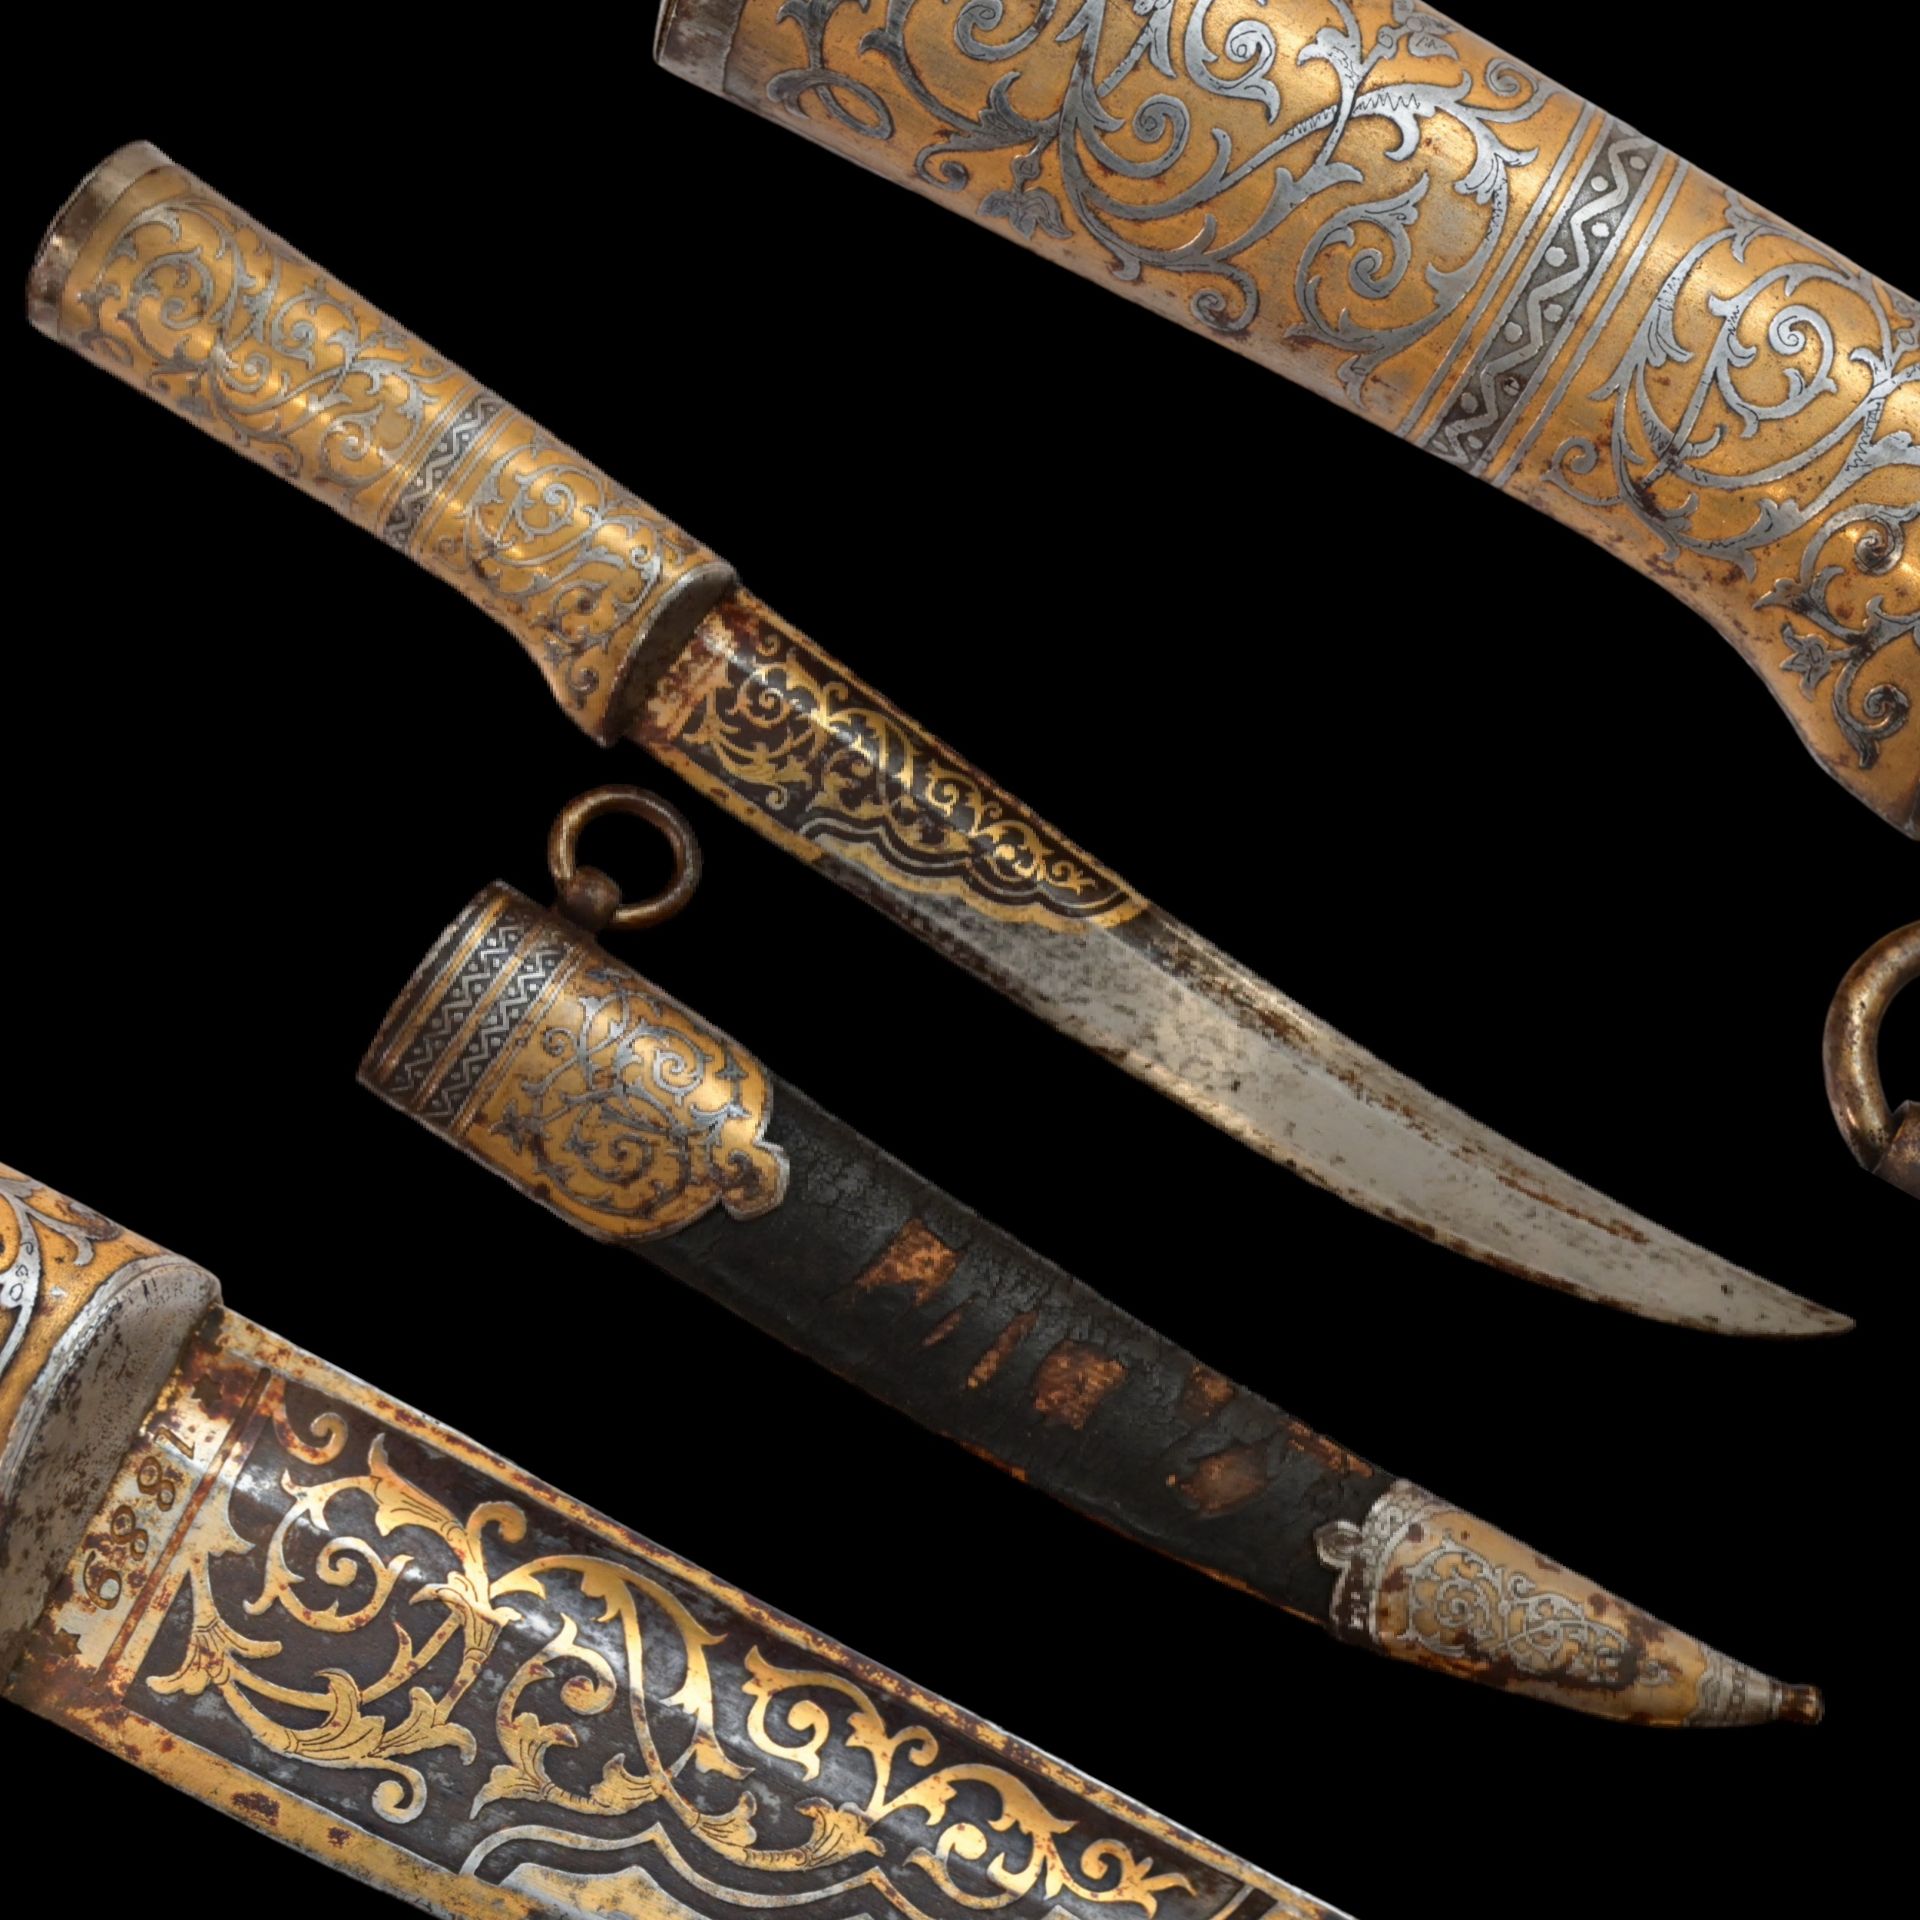 RARE HUNTING KNIFE, DECORATED WITH GOLD AND BLUE, RUSSIAN EMPIRE, ZLATOUST, 1889.